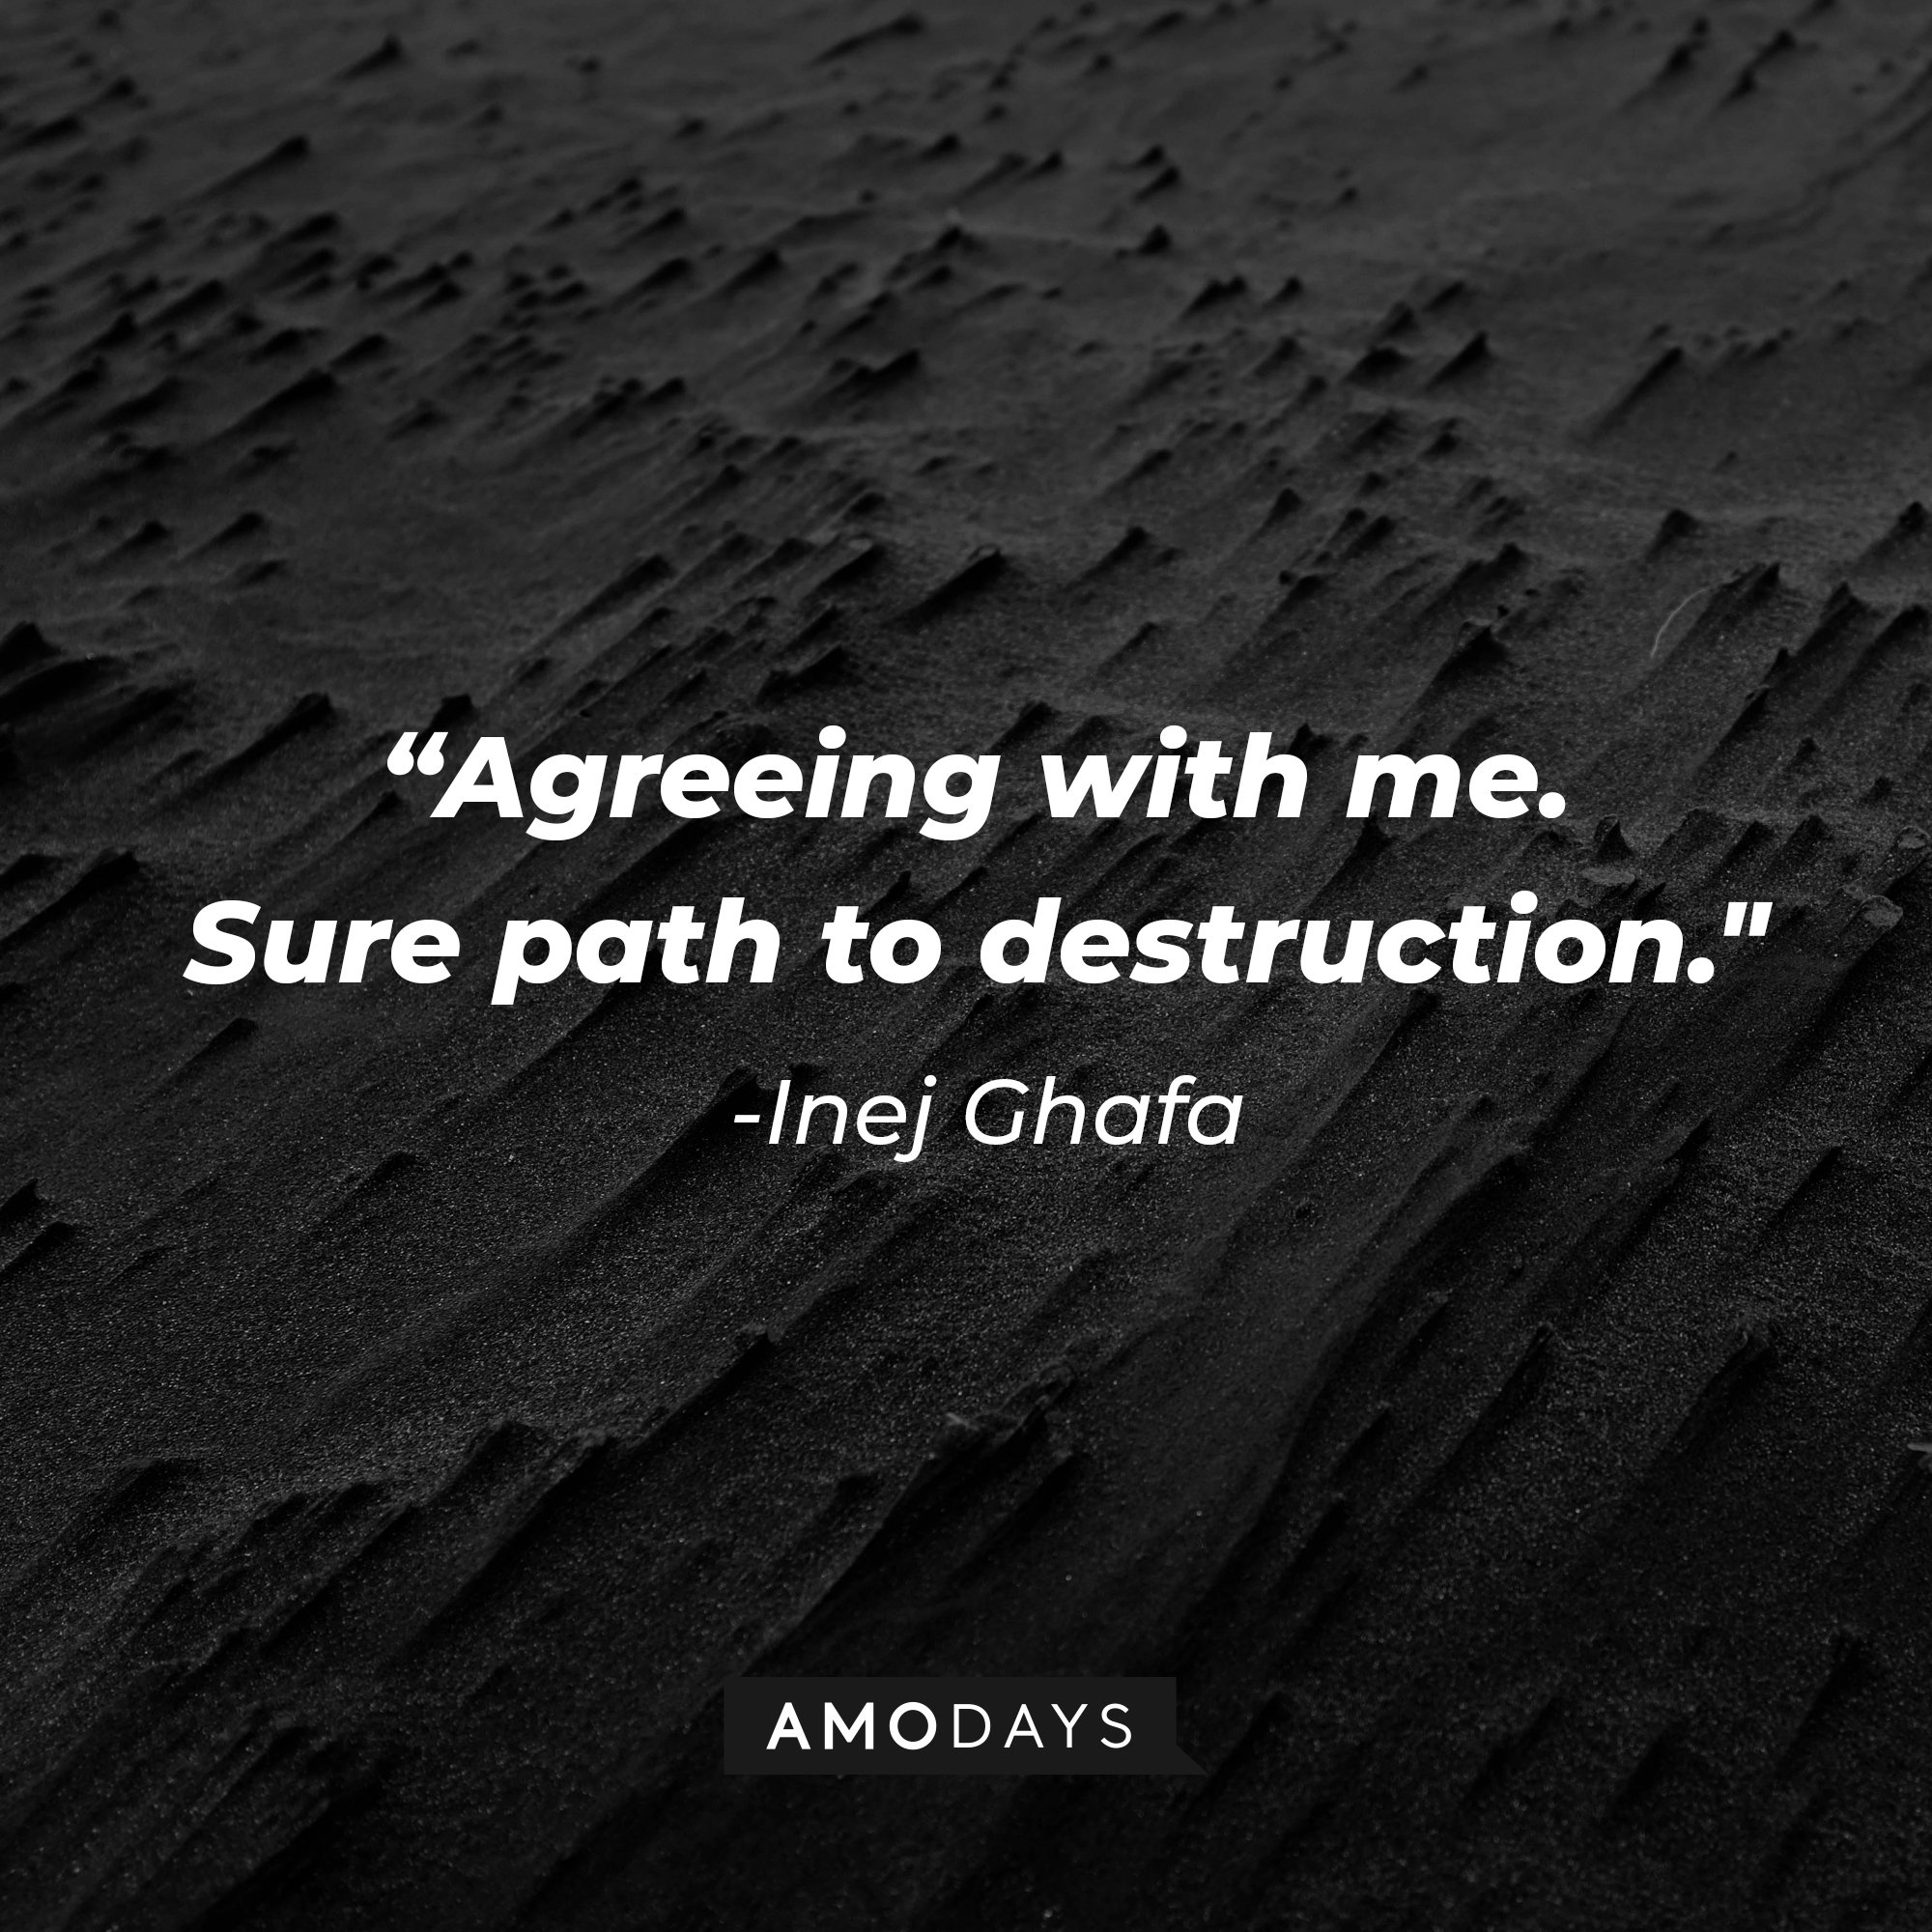 Inej Ghafa’s quote: "Agreeing with me. Sure path to destruction." | Image: AmoDays